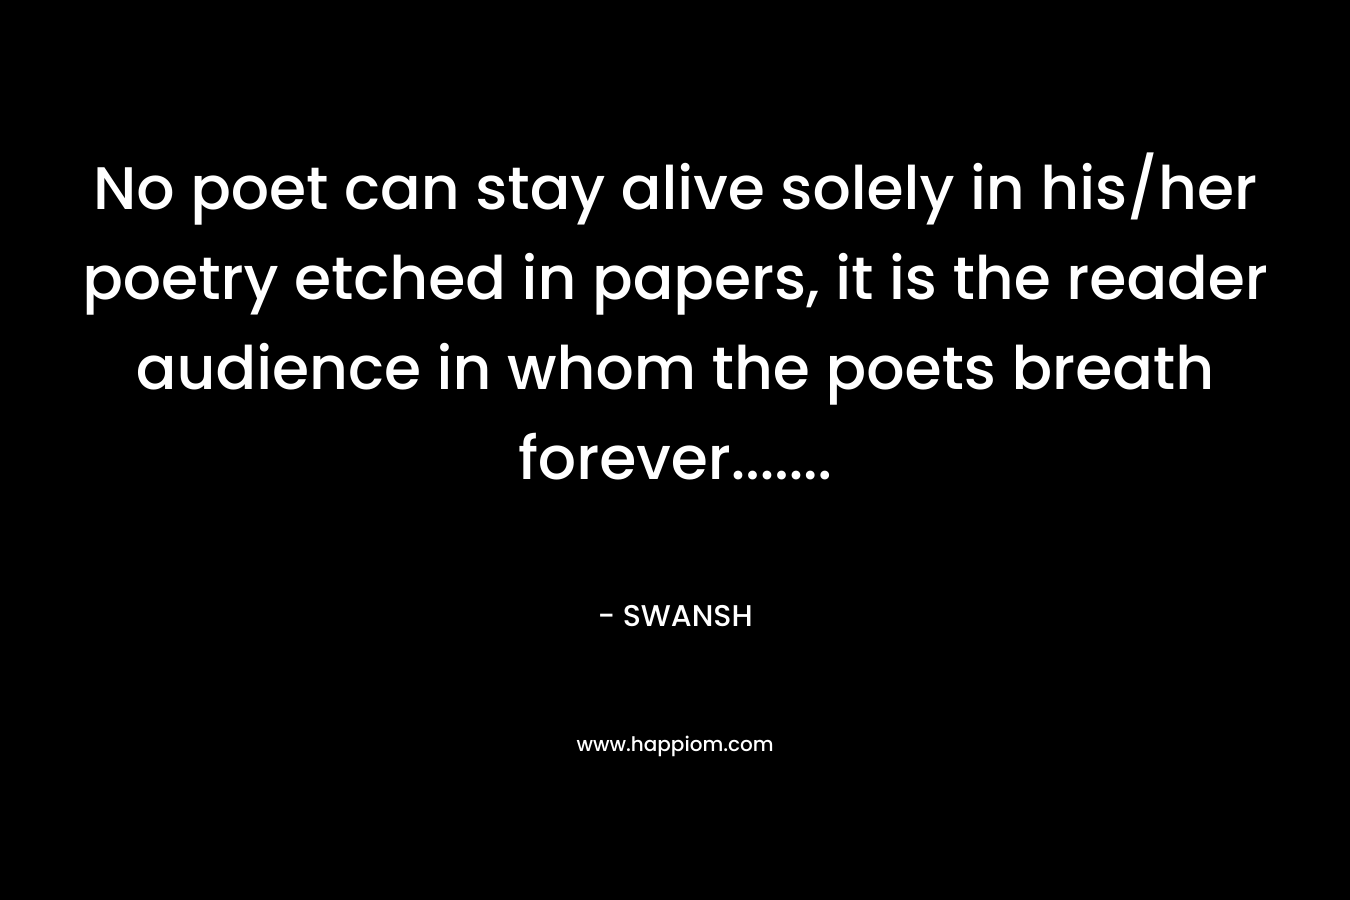 No poet can stay alive solely in his/her poetry etched in papers, it is the reader audience in whom the poets breath forever……. – SWANSH